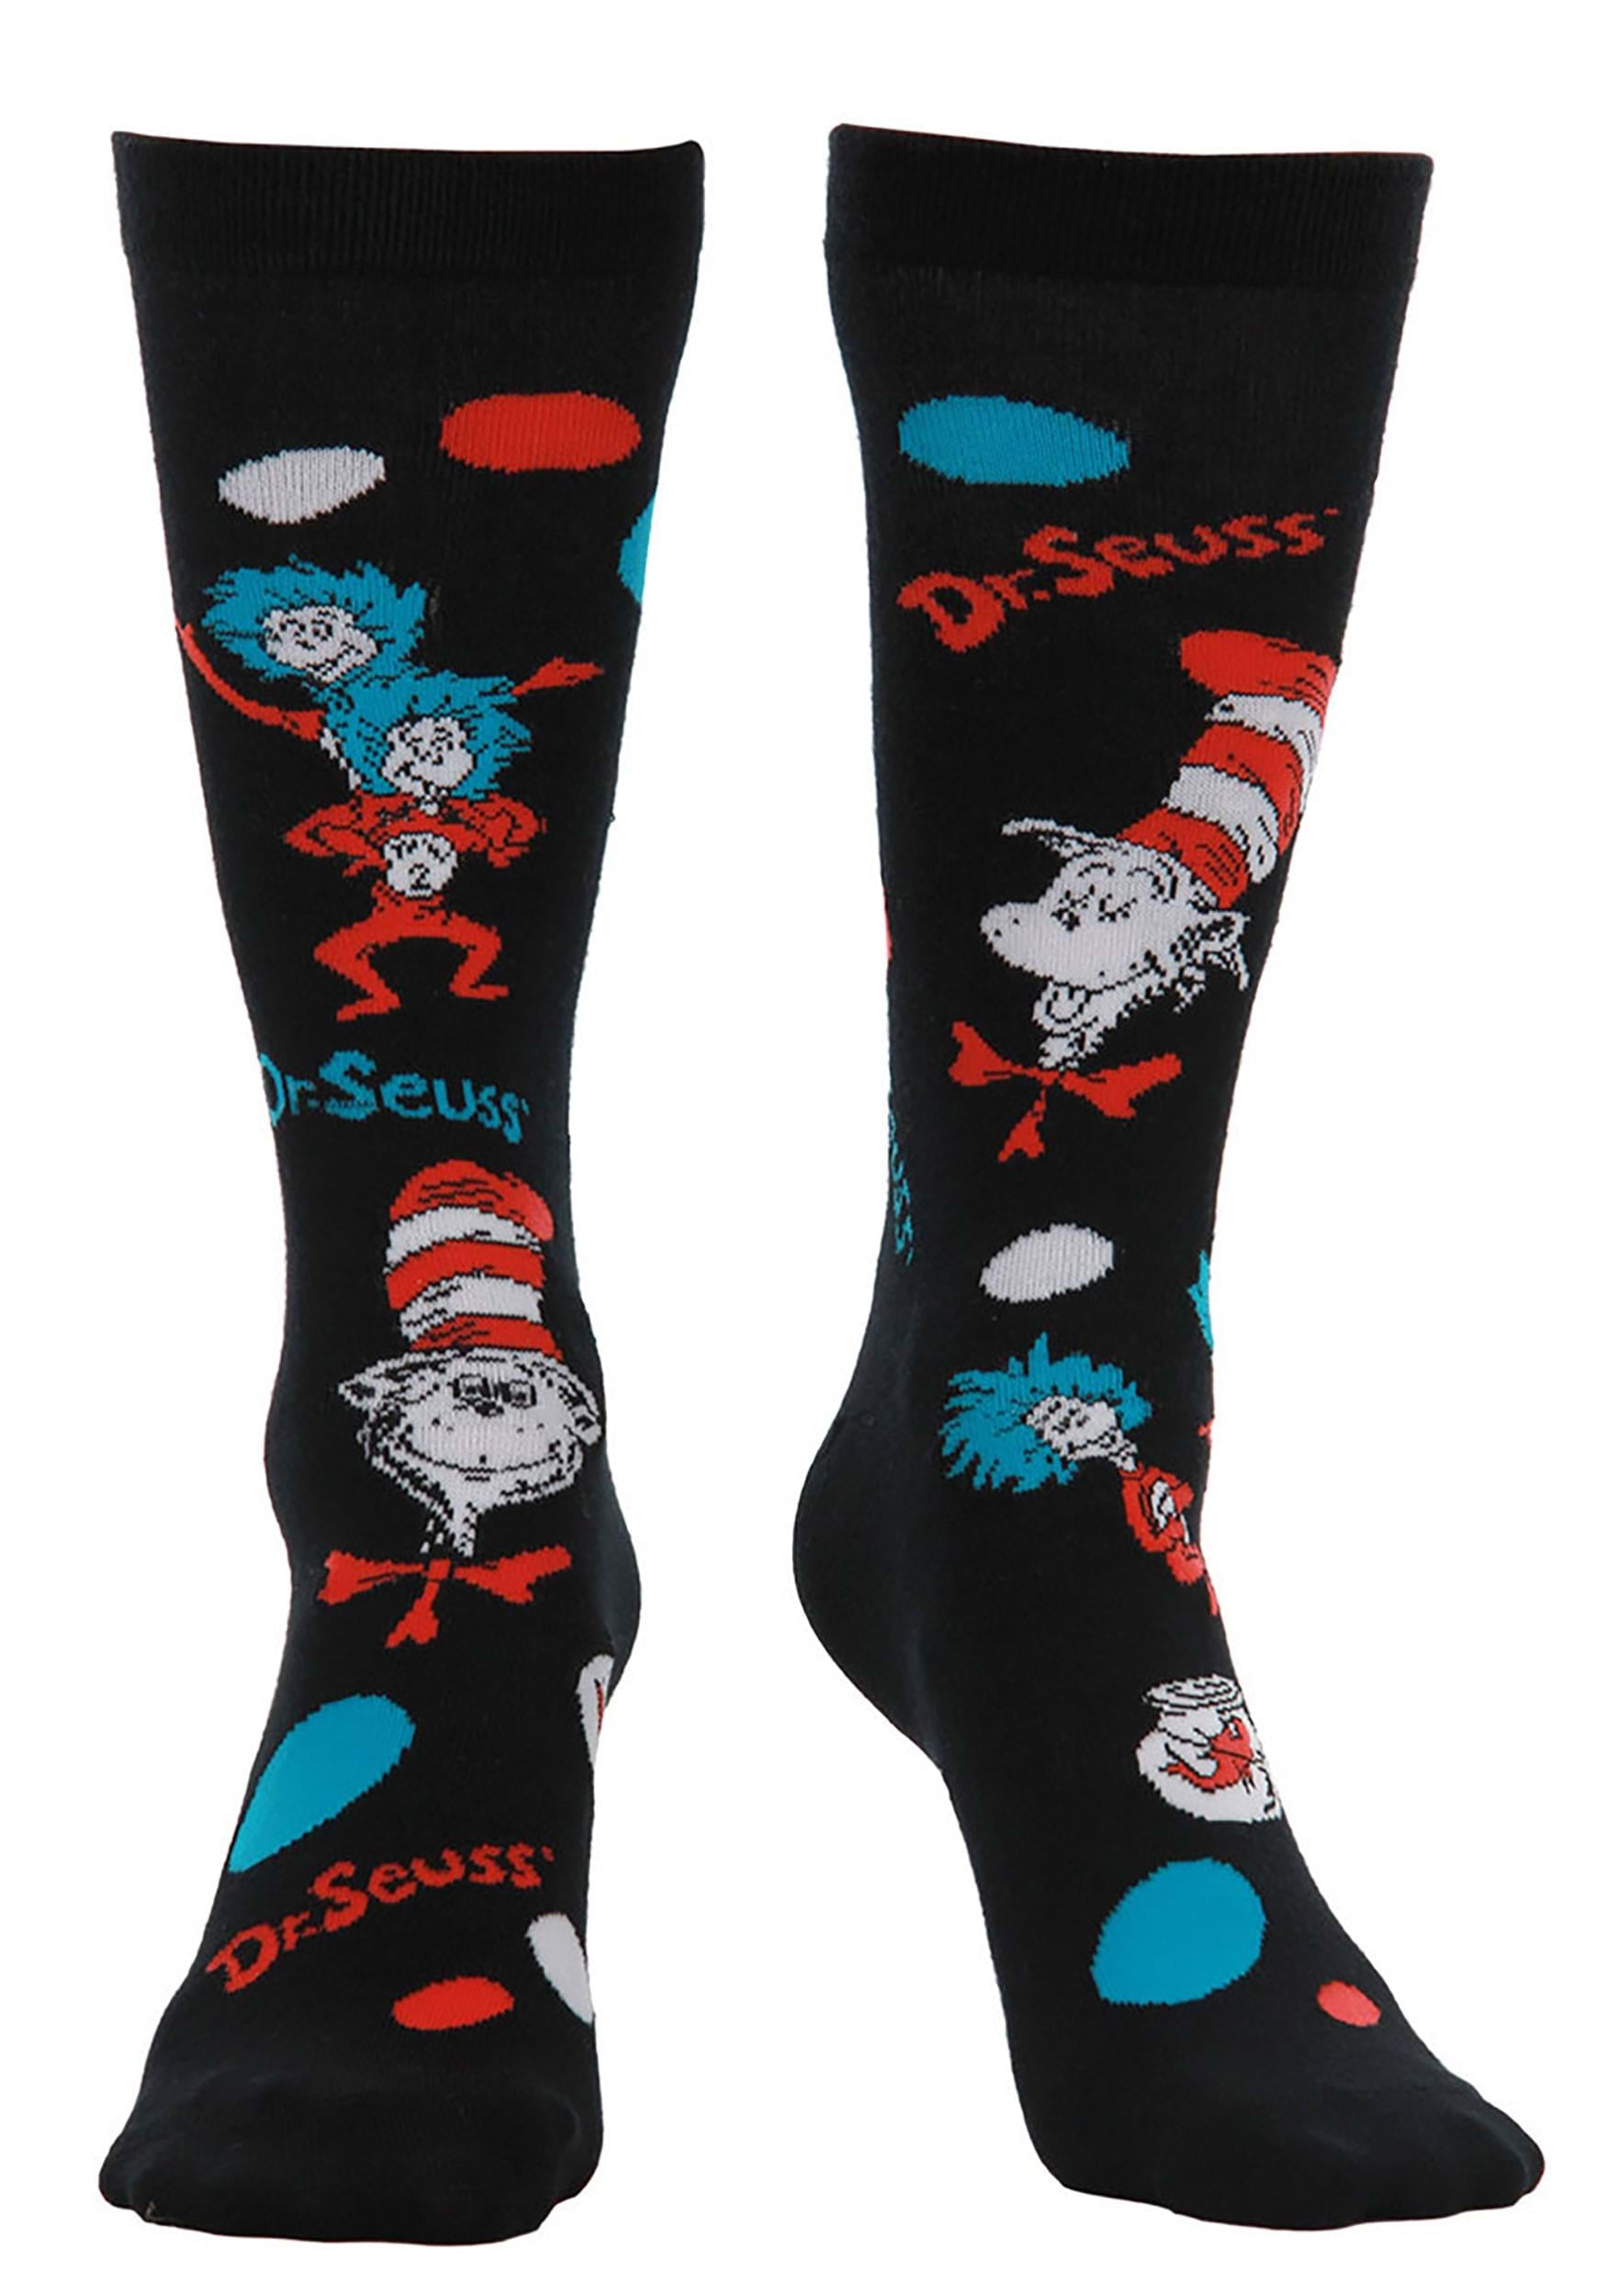 5 Dr Suess Casual Crew Socks Shoe Size 8-12 One Fish Two Fish Grinch Thing 1 2 